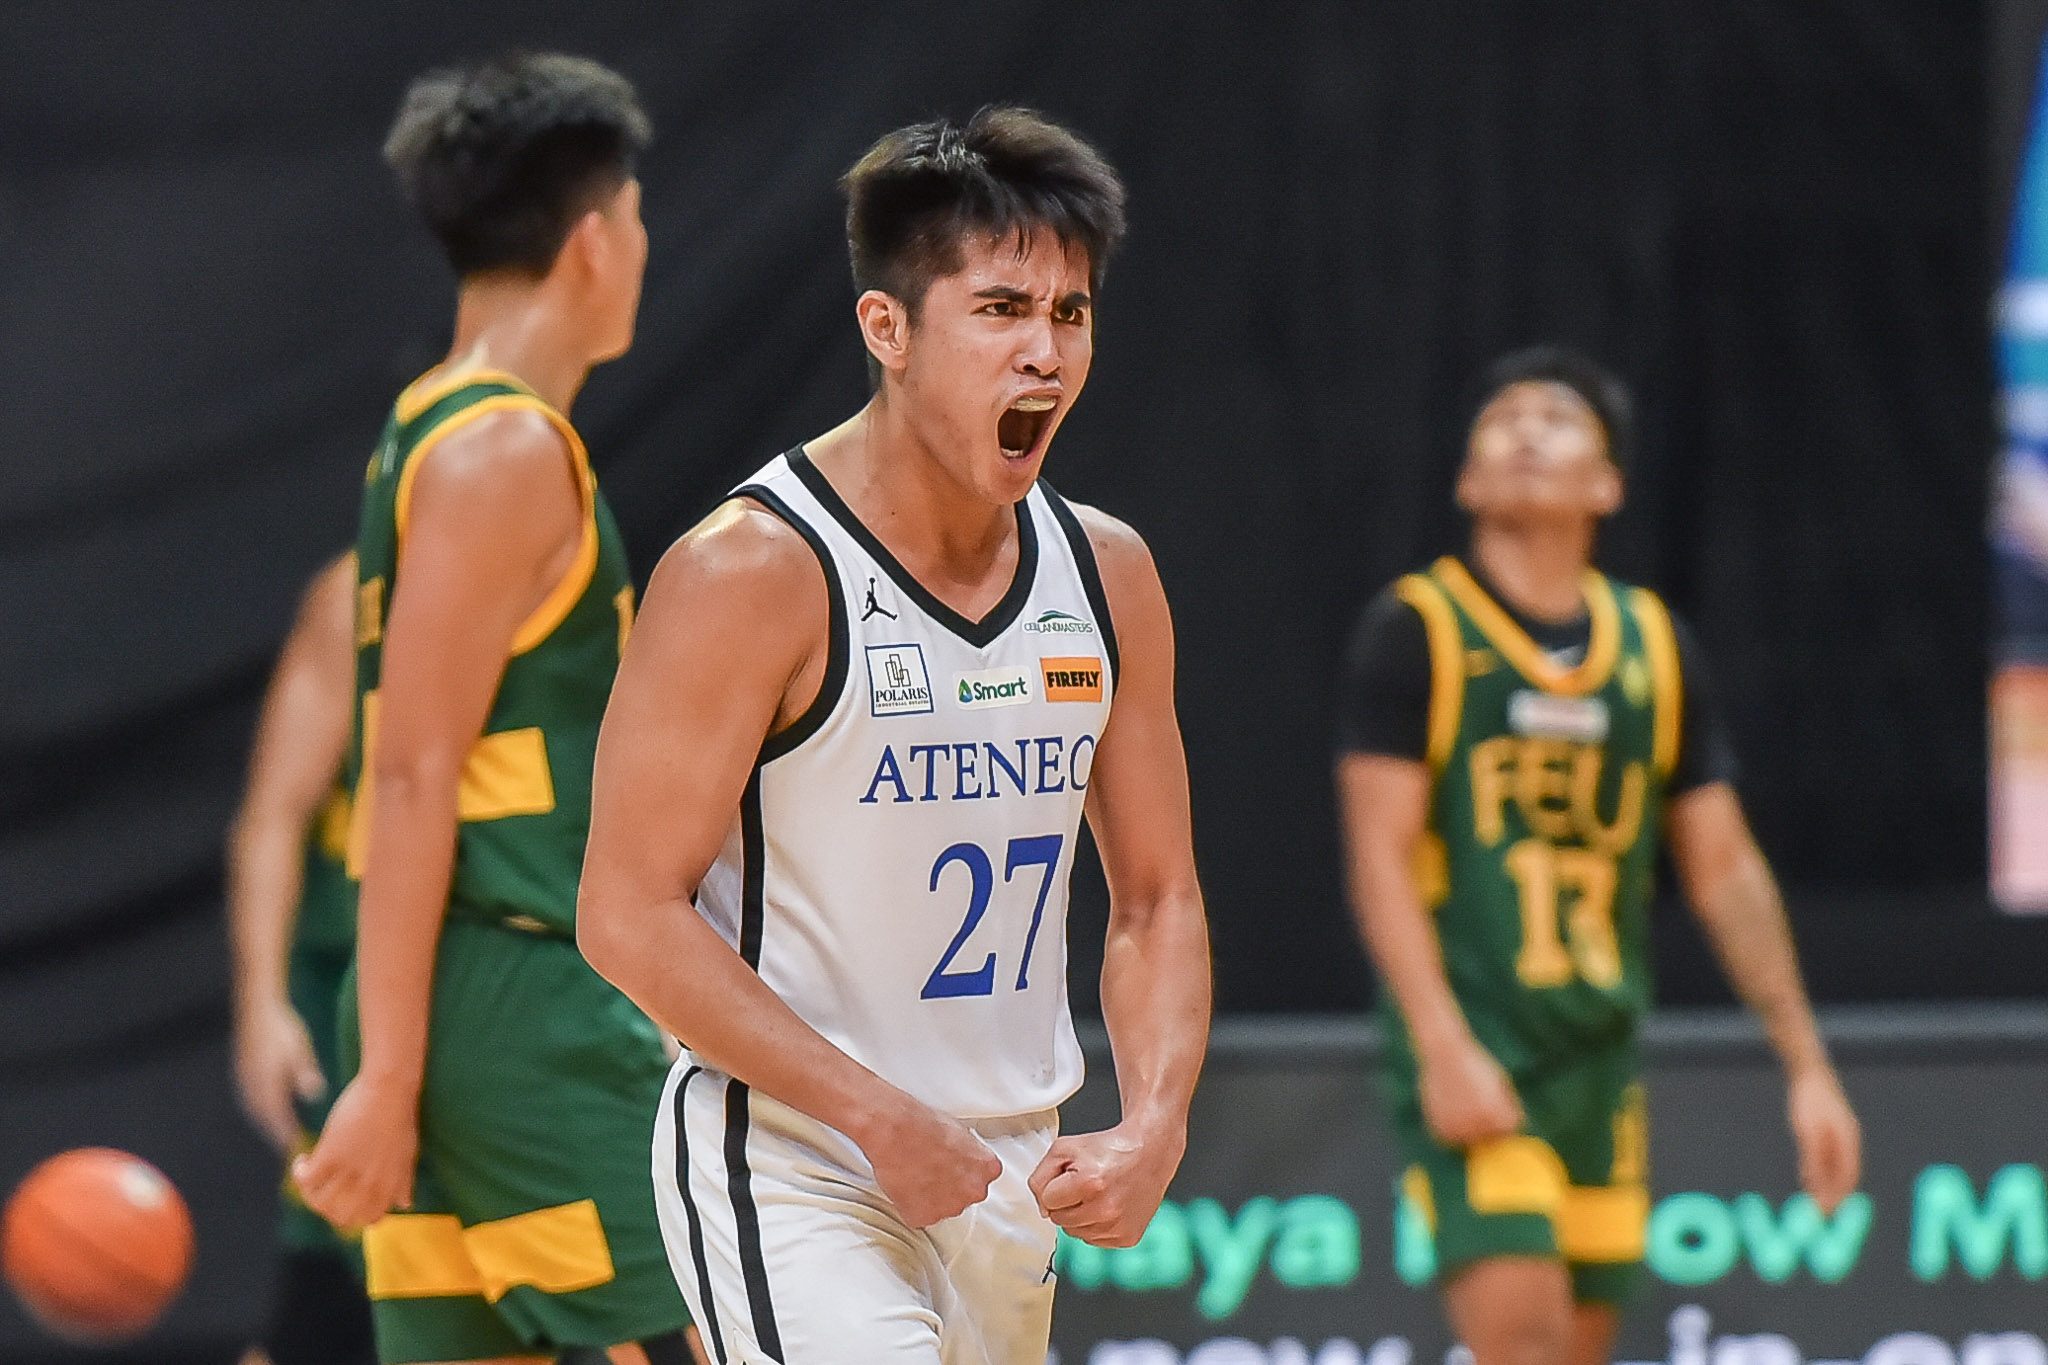 Ateneo vents ire on FEU, clinches fifth straight UAAP finals berth for 4-peat bid